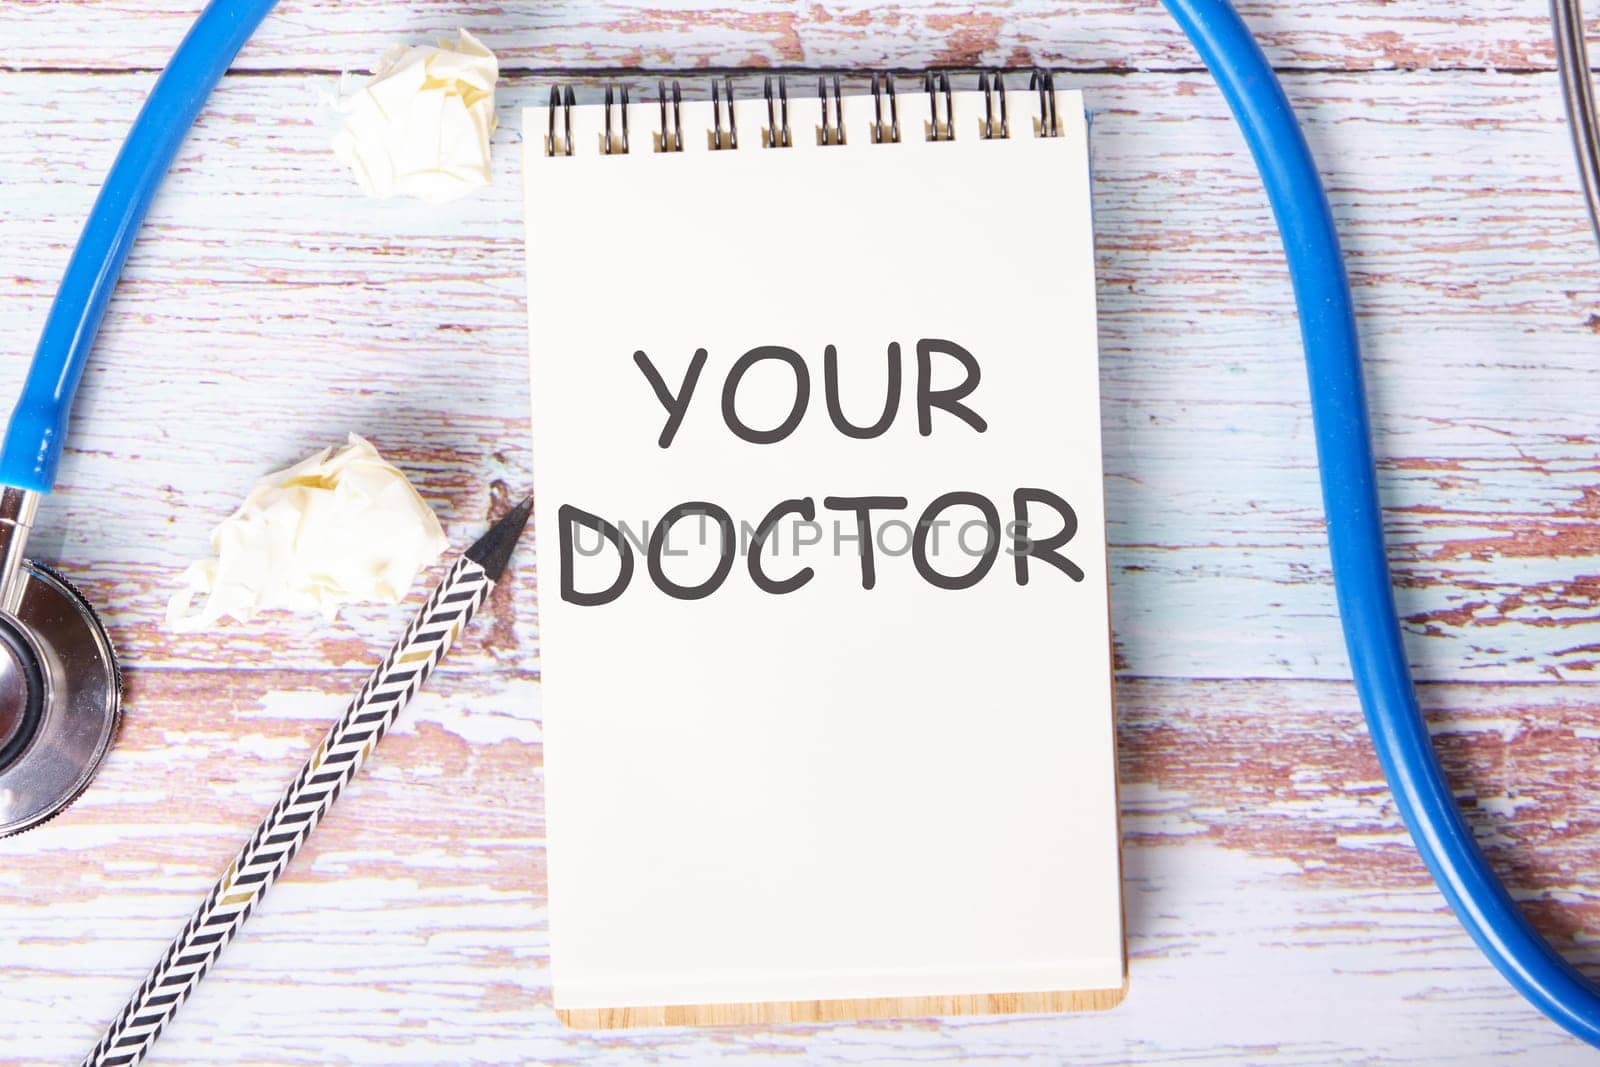 YOUR DOCTOR text is written on a notebook that lies on old vintage boards